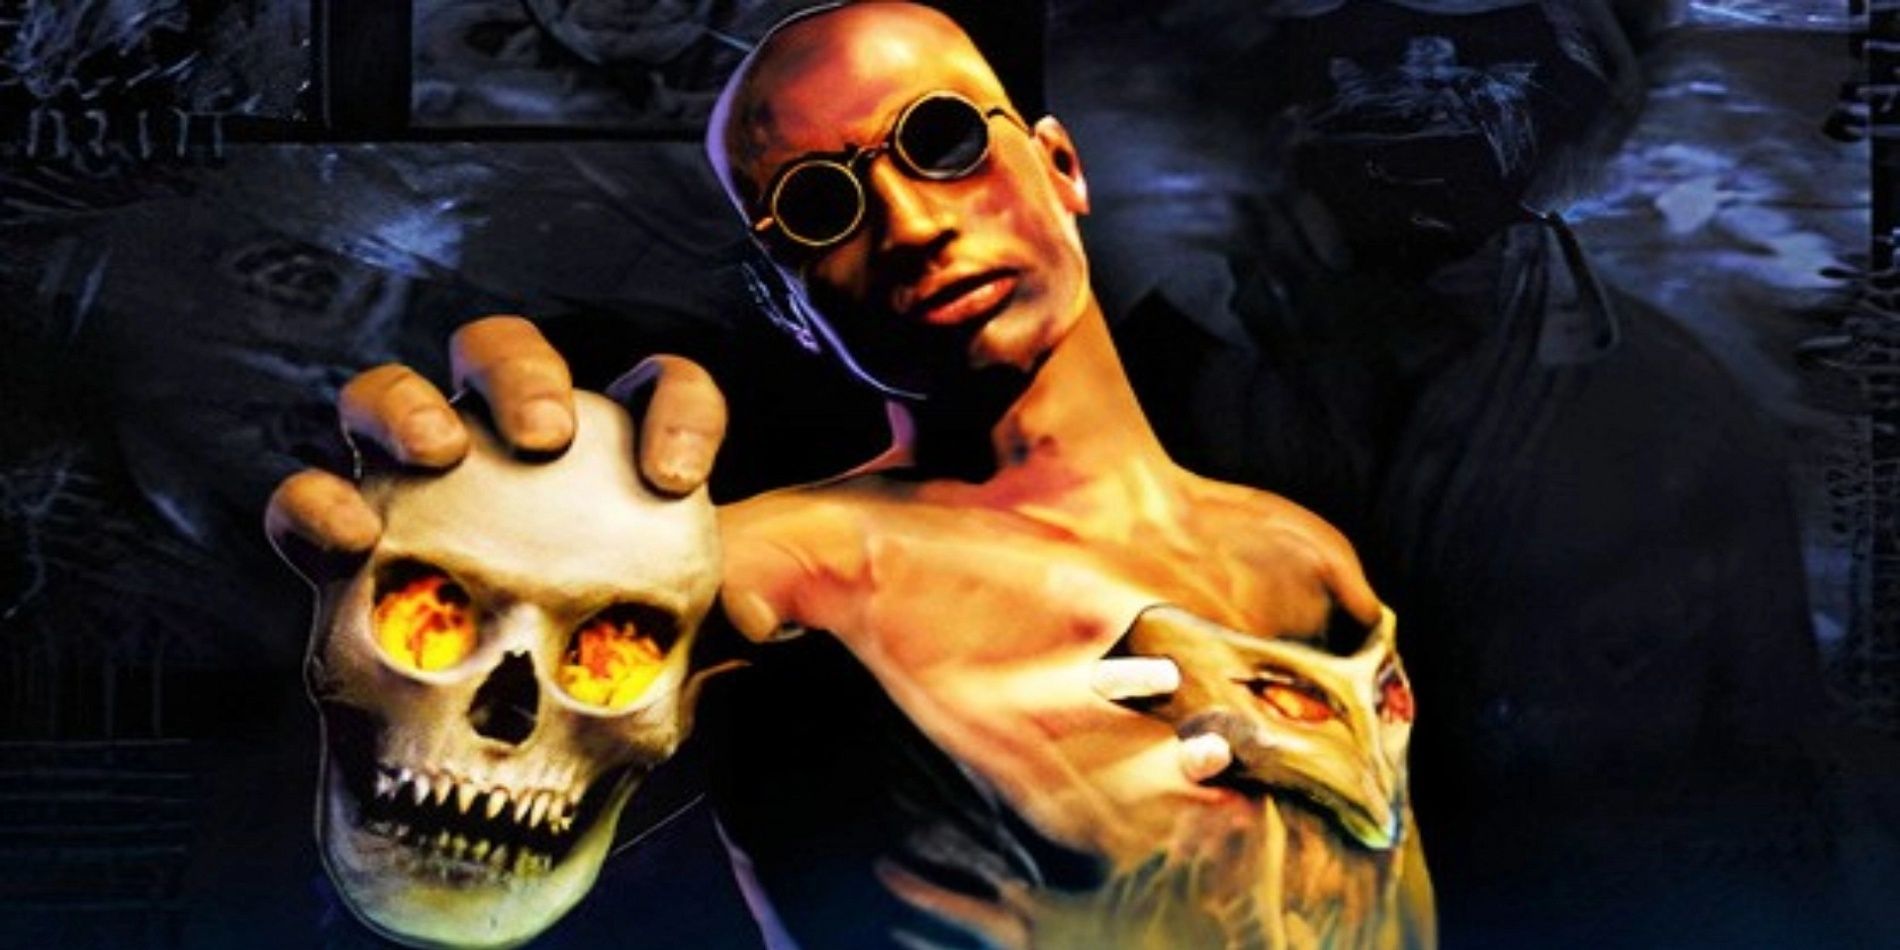 Michael LeRoi, the protagonist of Shadow Man Remastered, holding a skull with flame eyes